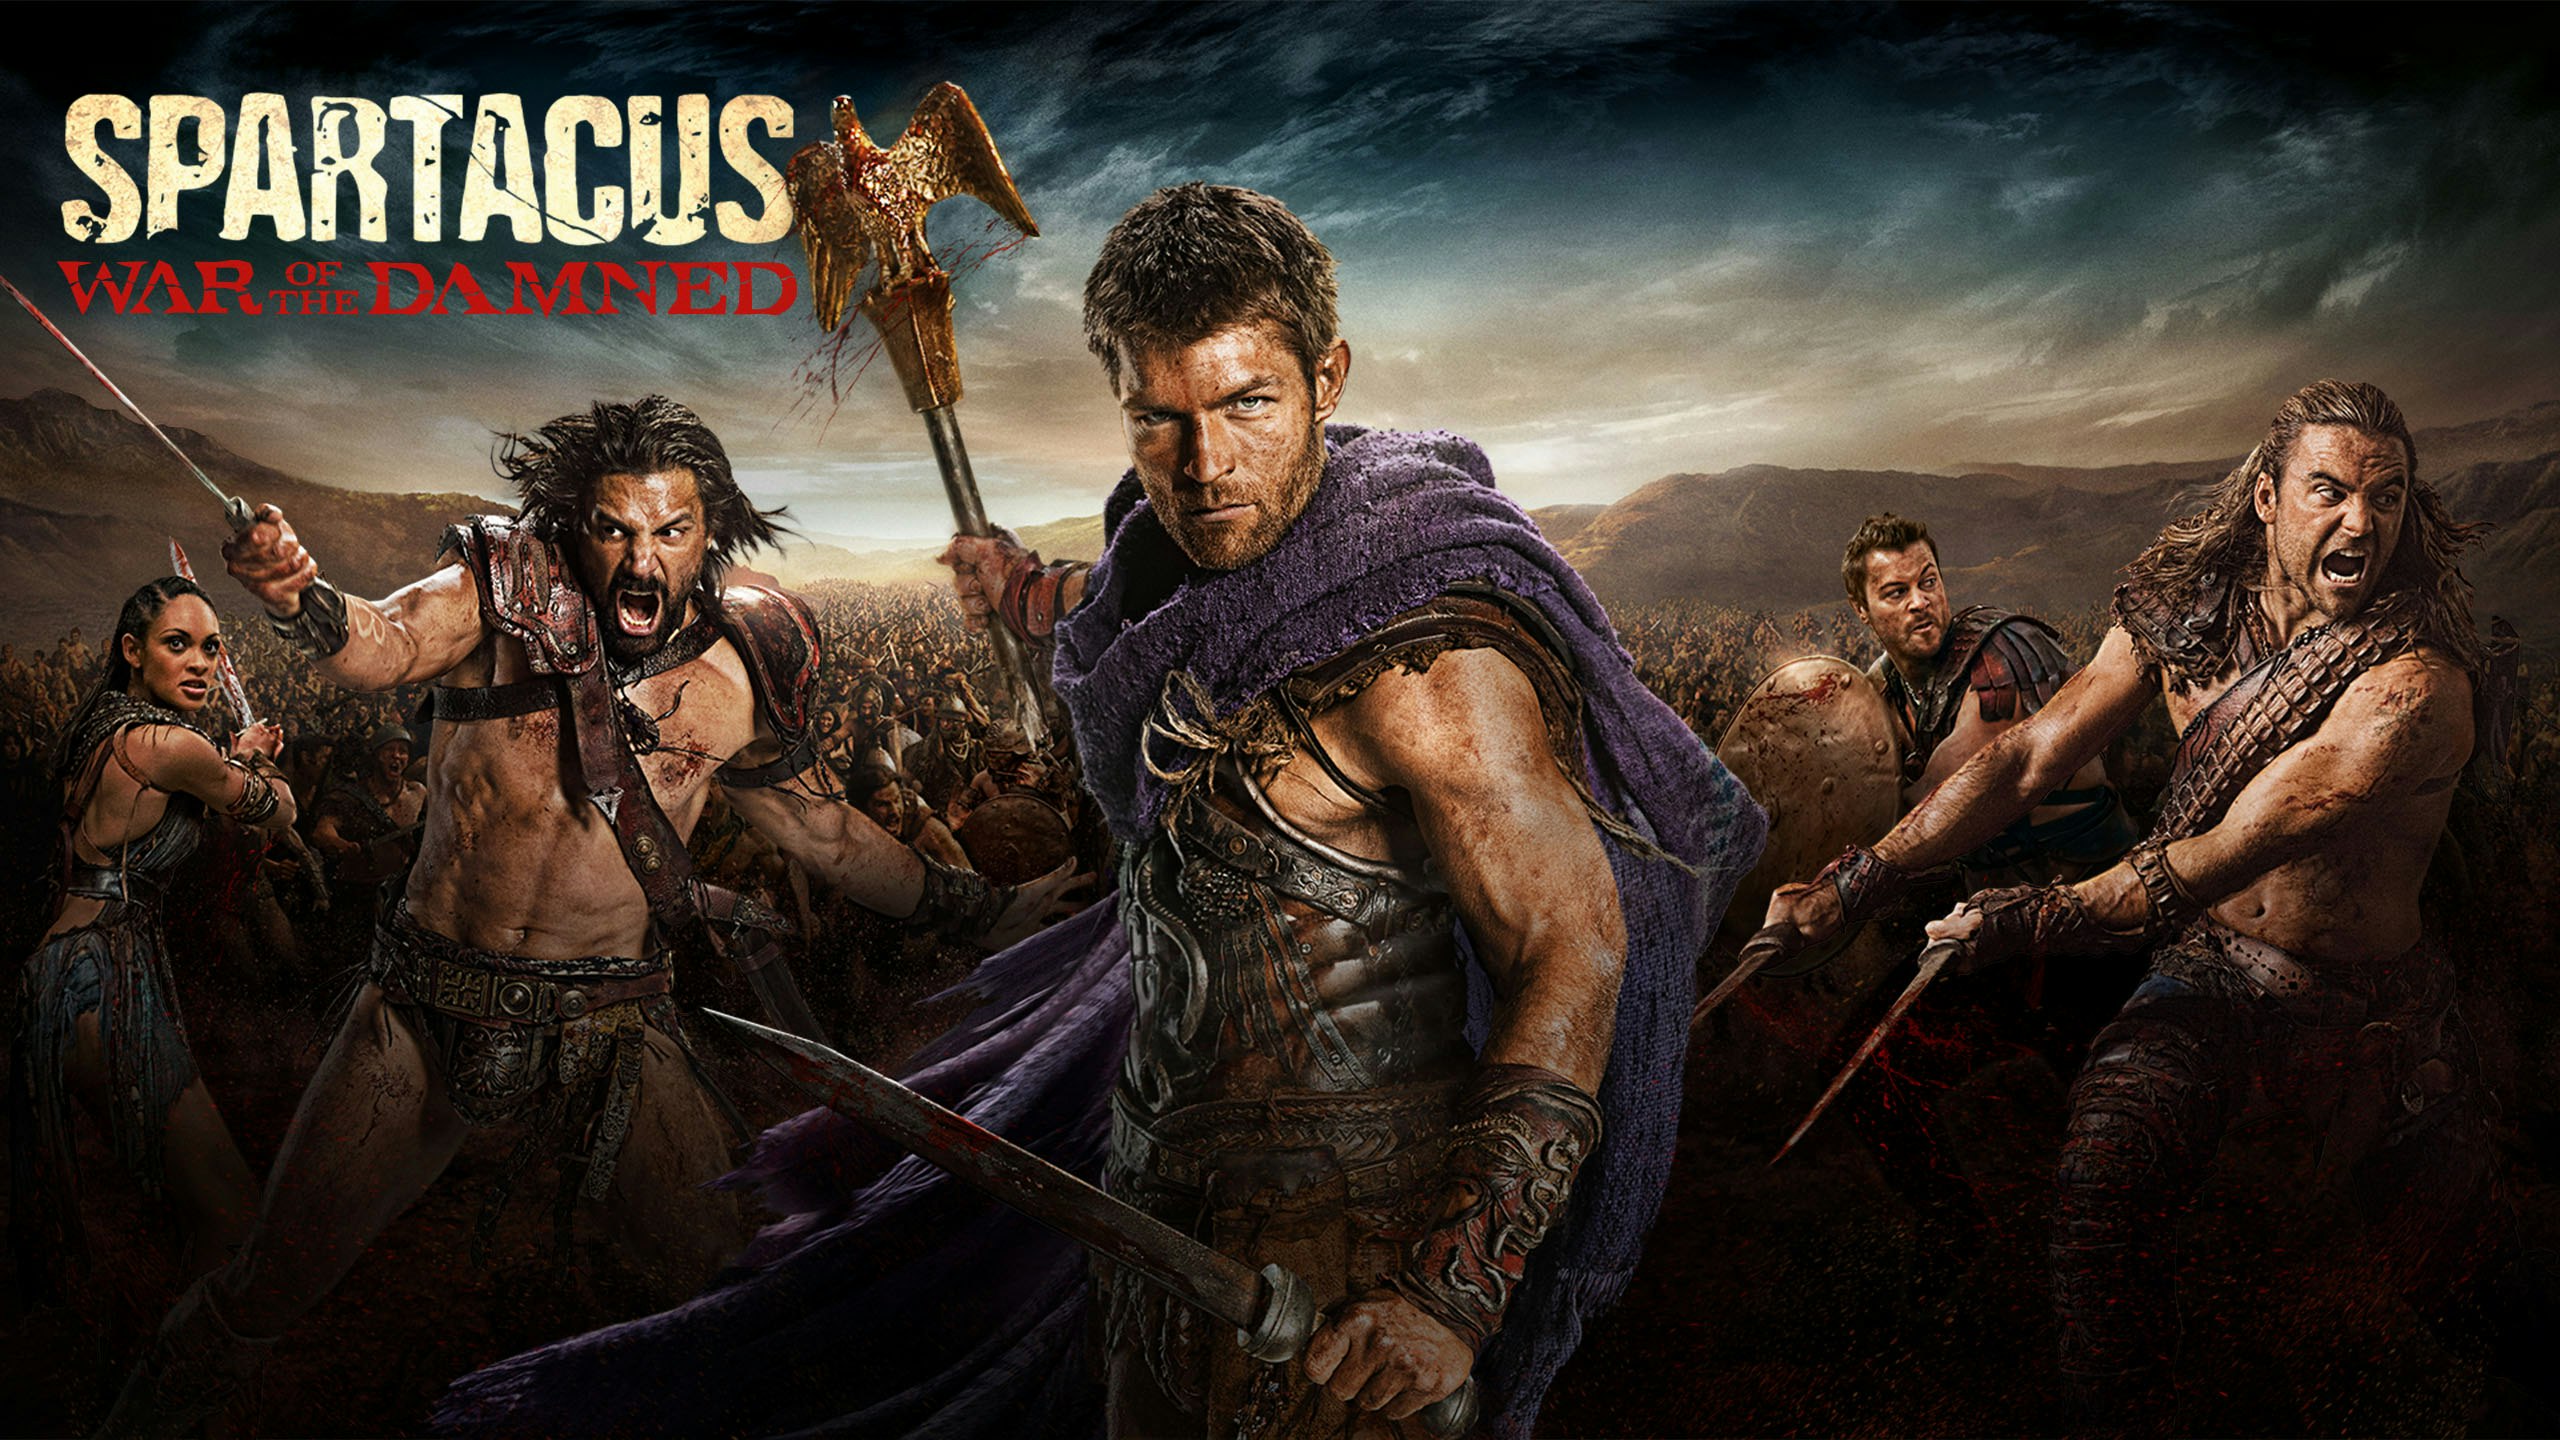 diane watanabe recommends where to watch spartacus for free pic